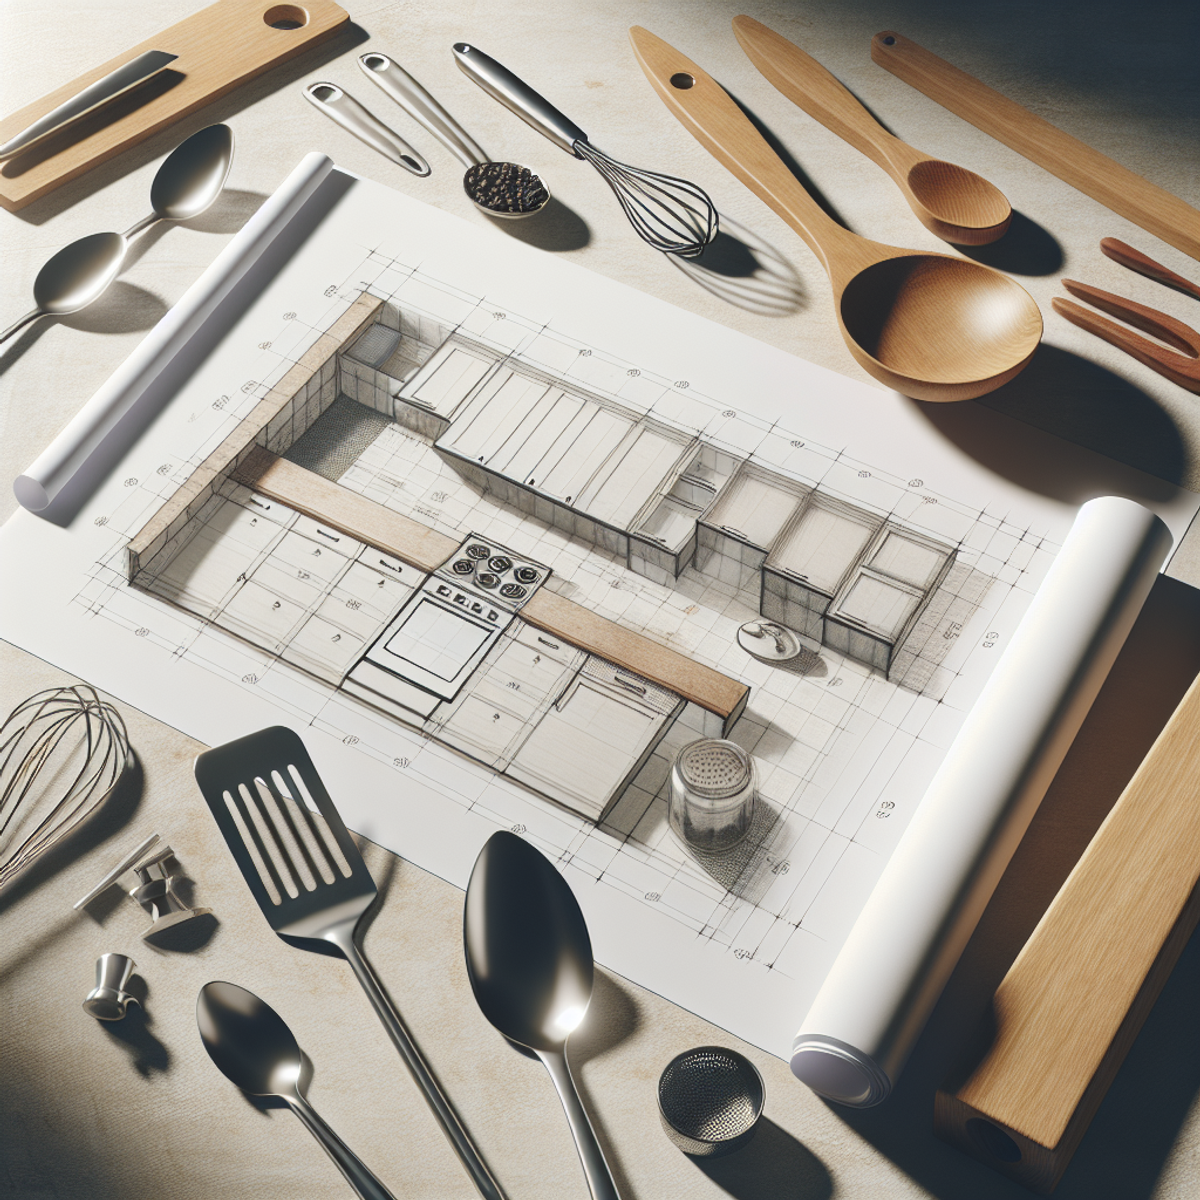 Kitchen blueprint with utensils and tools scattered around.